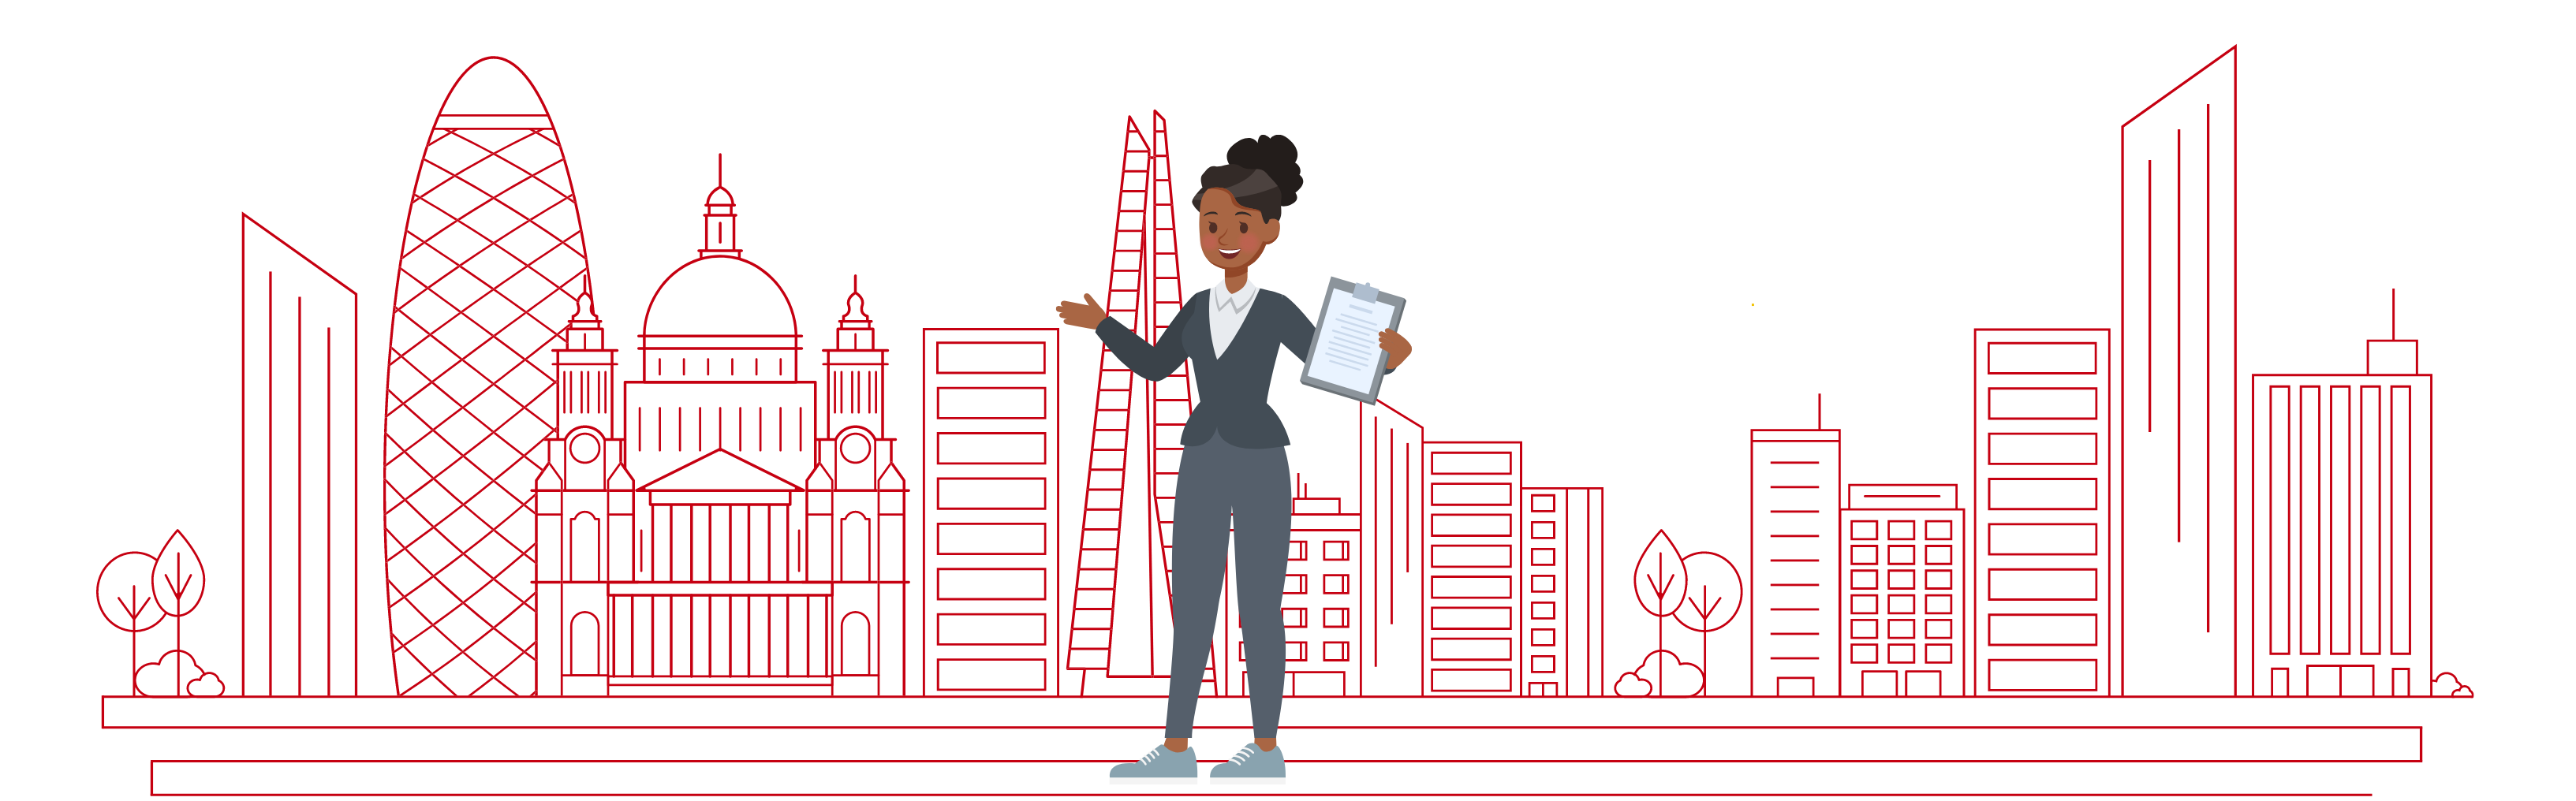 Graphic showing a female teacher in front of a city skyline